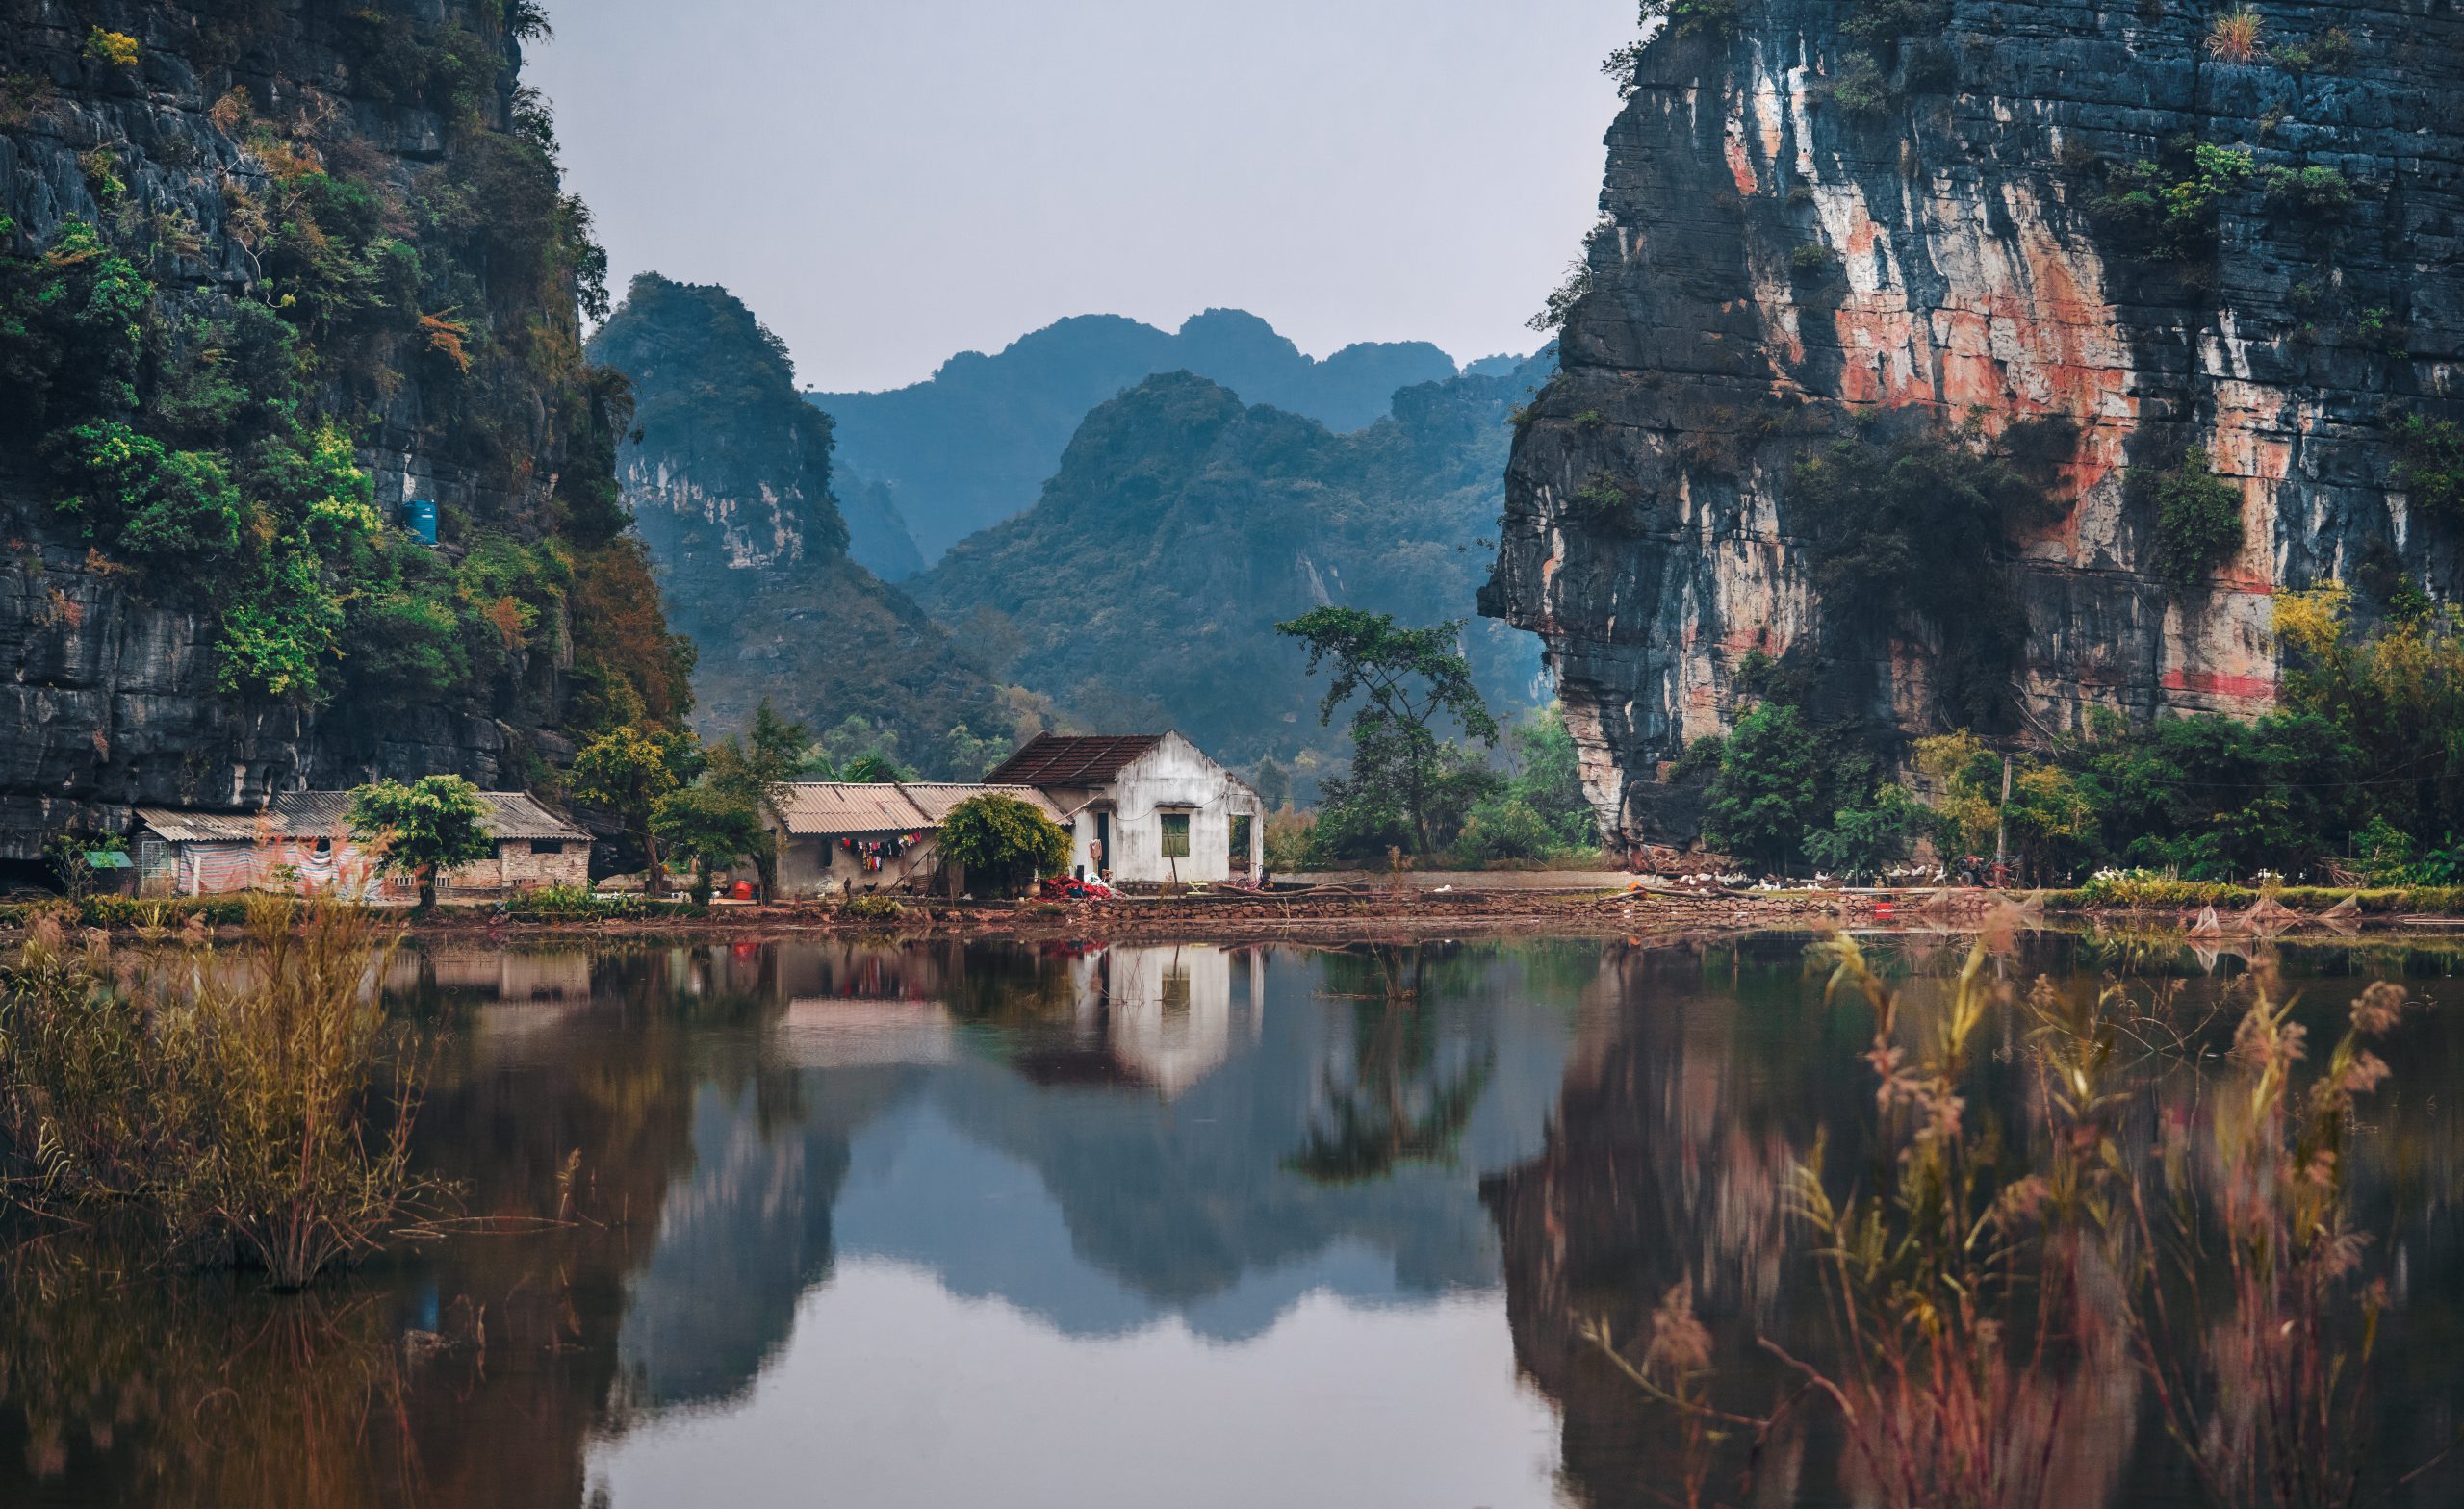 Vietnam mountains with lake and house in front